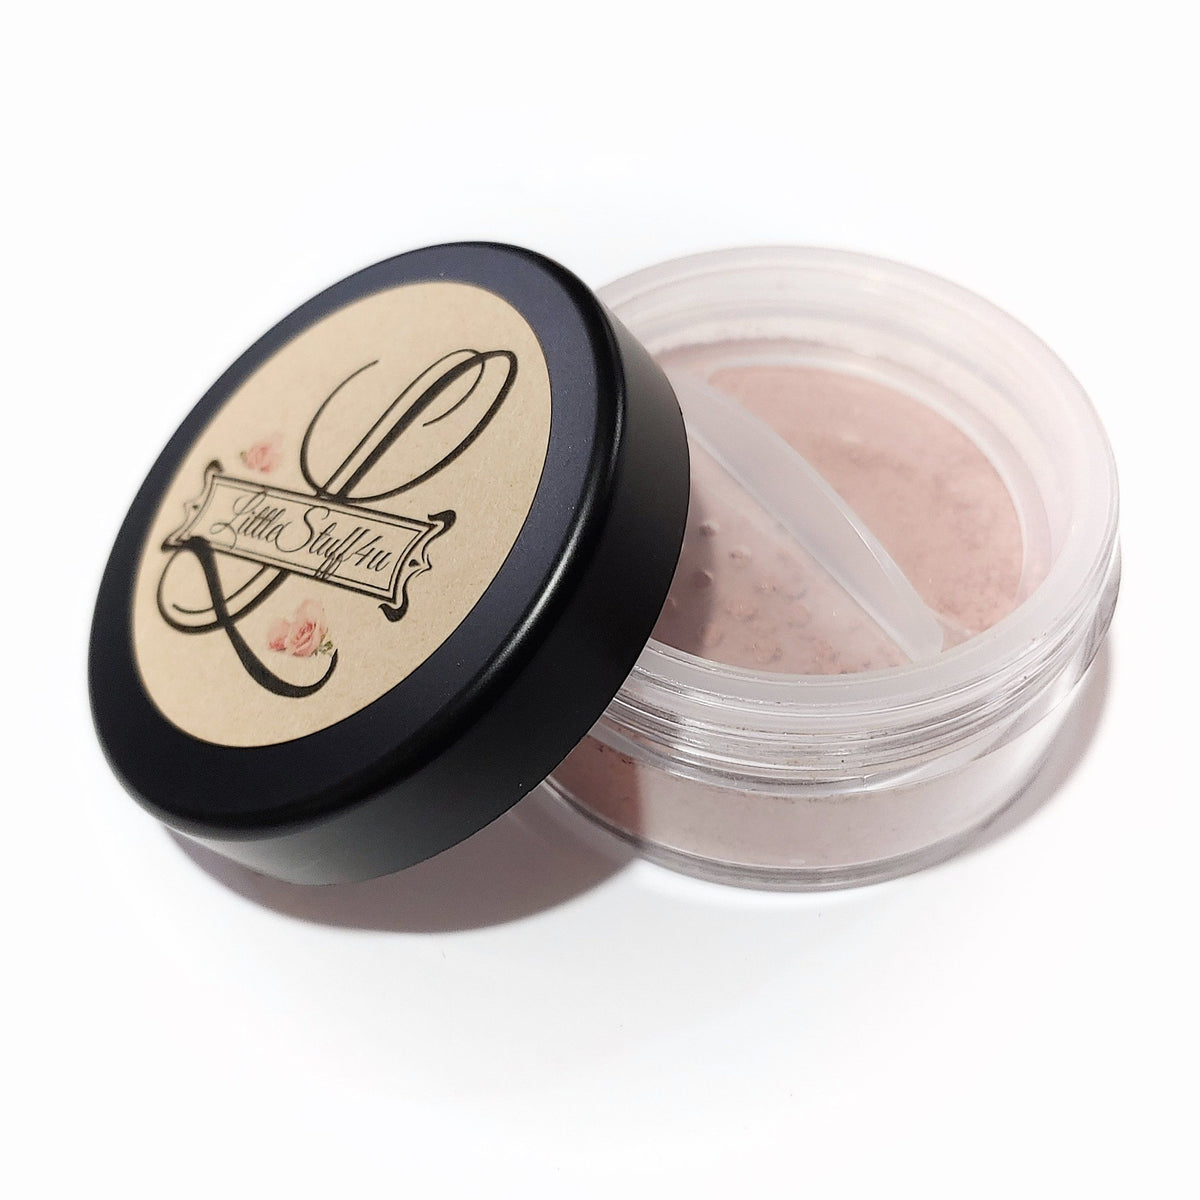 Cool Tan Mineral Foundation